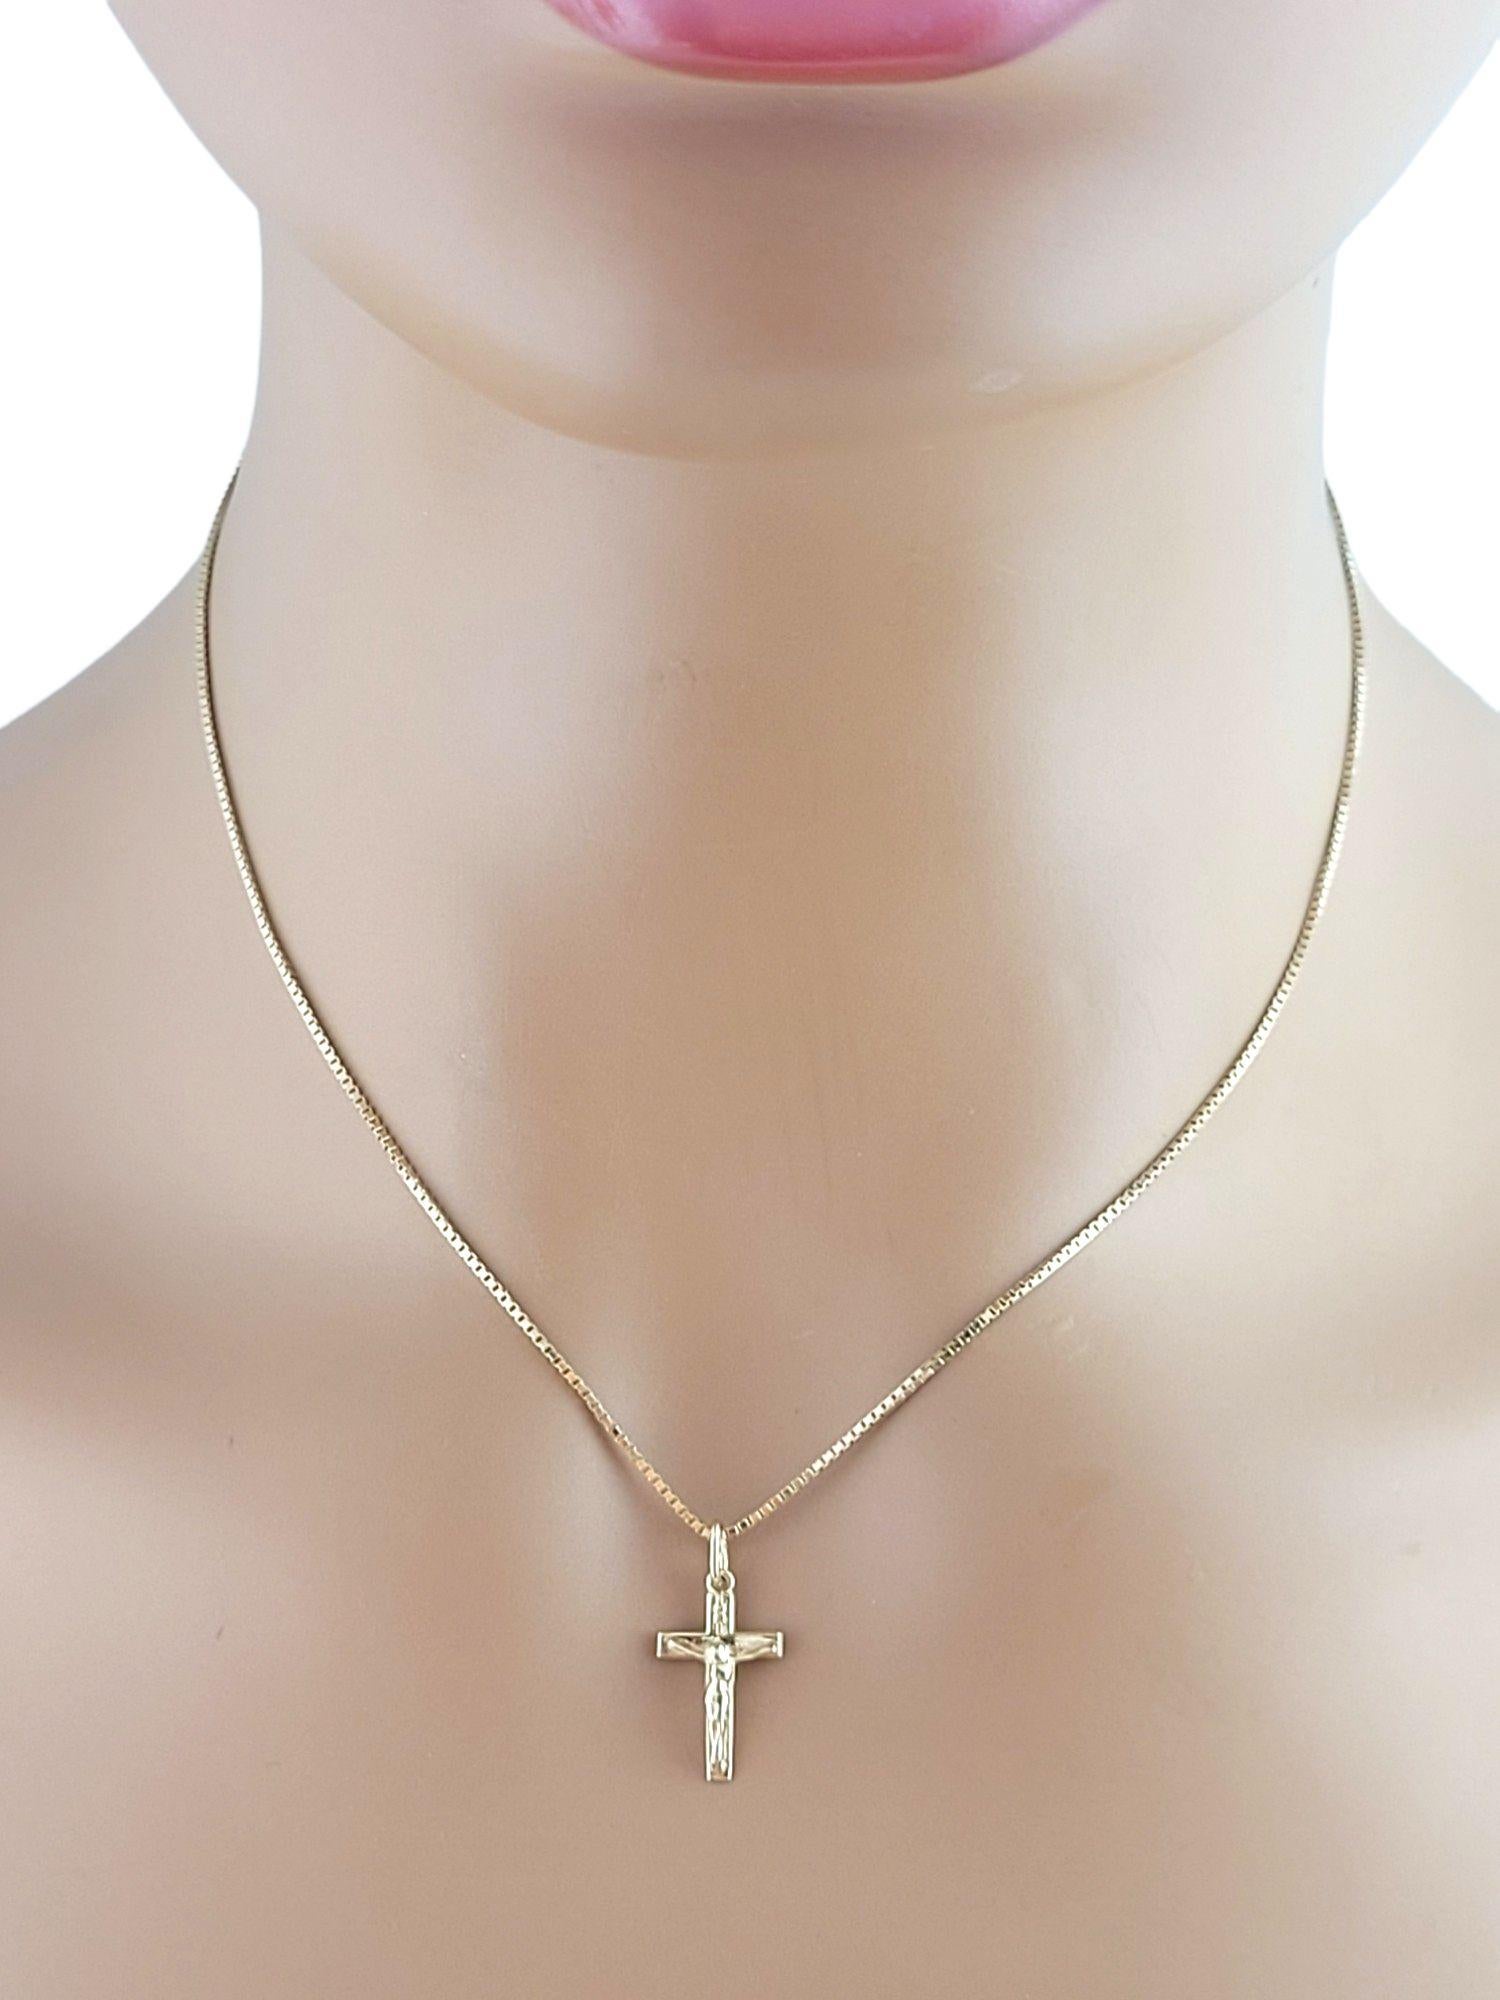 14K Yellow Gold Box Chain with Cross Pendant #14870 For Sale 3